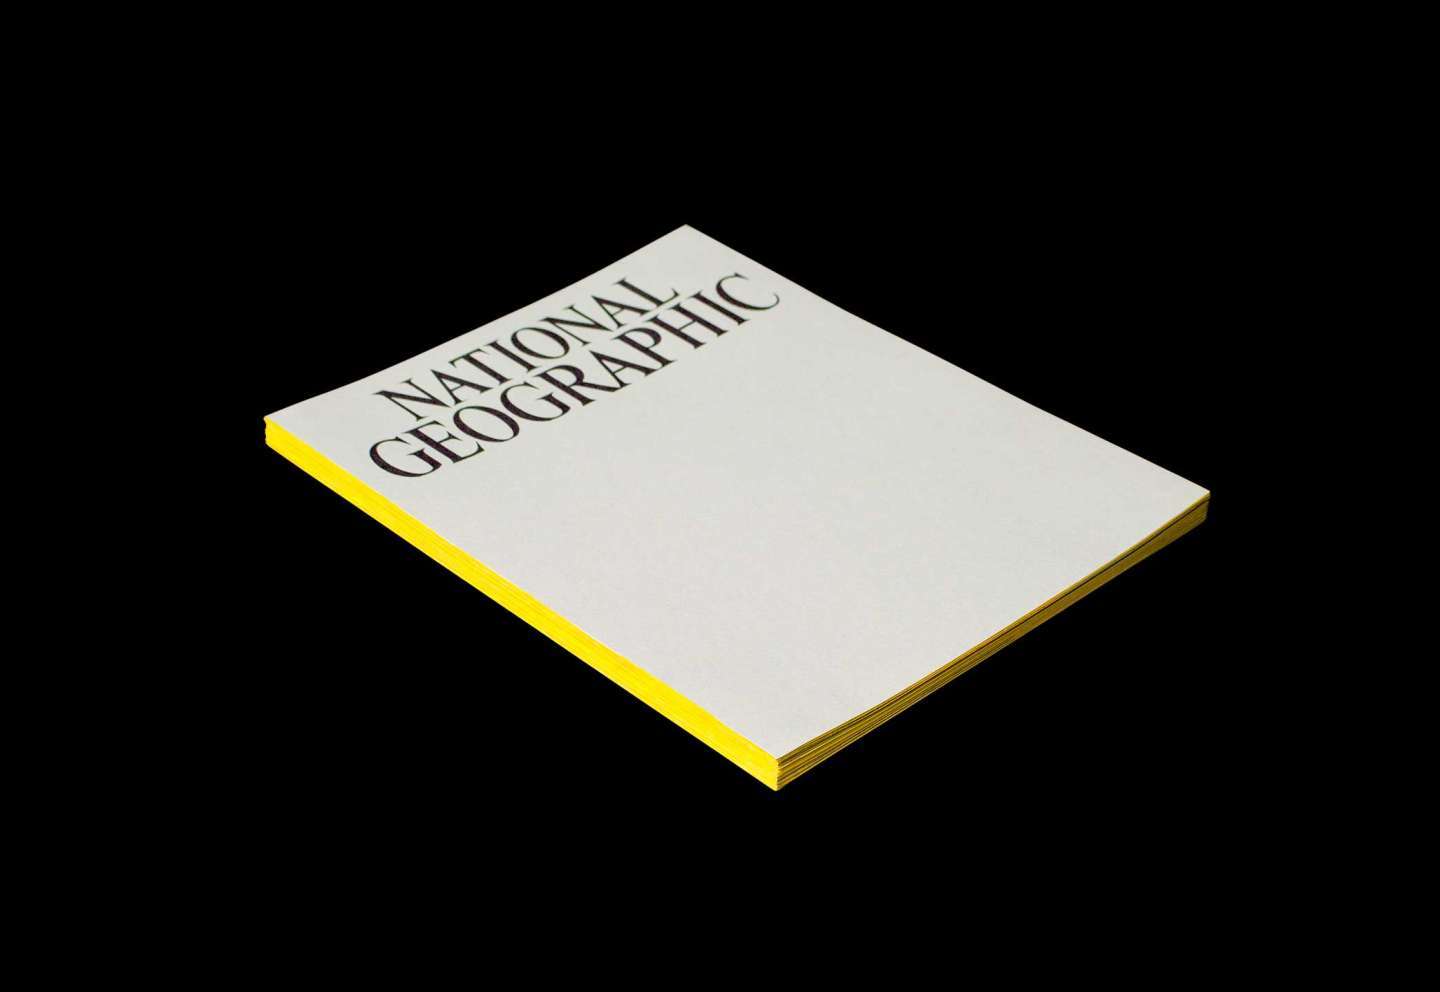 National Geographic Redesign